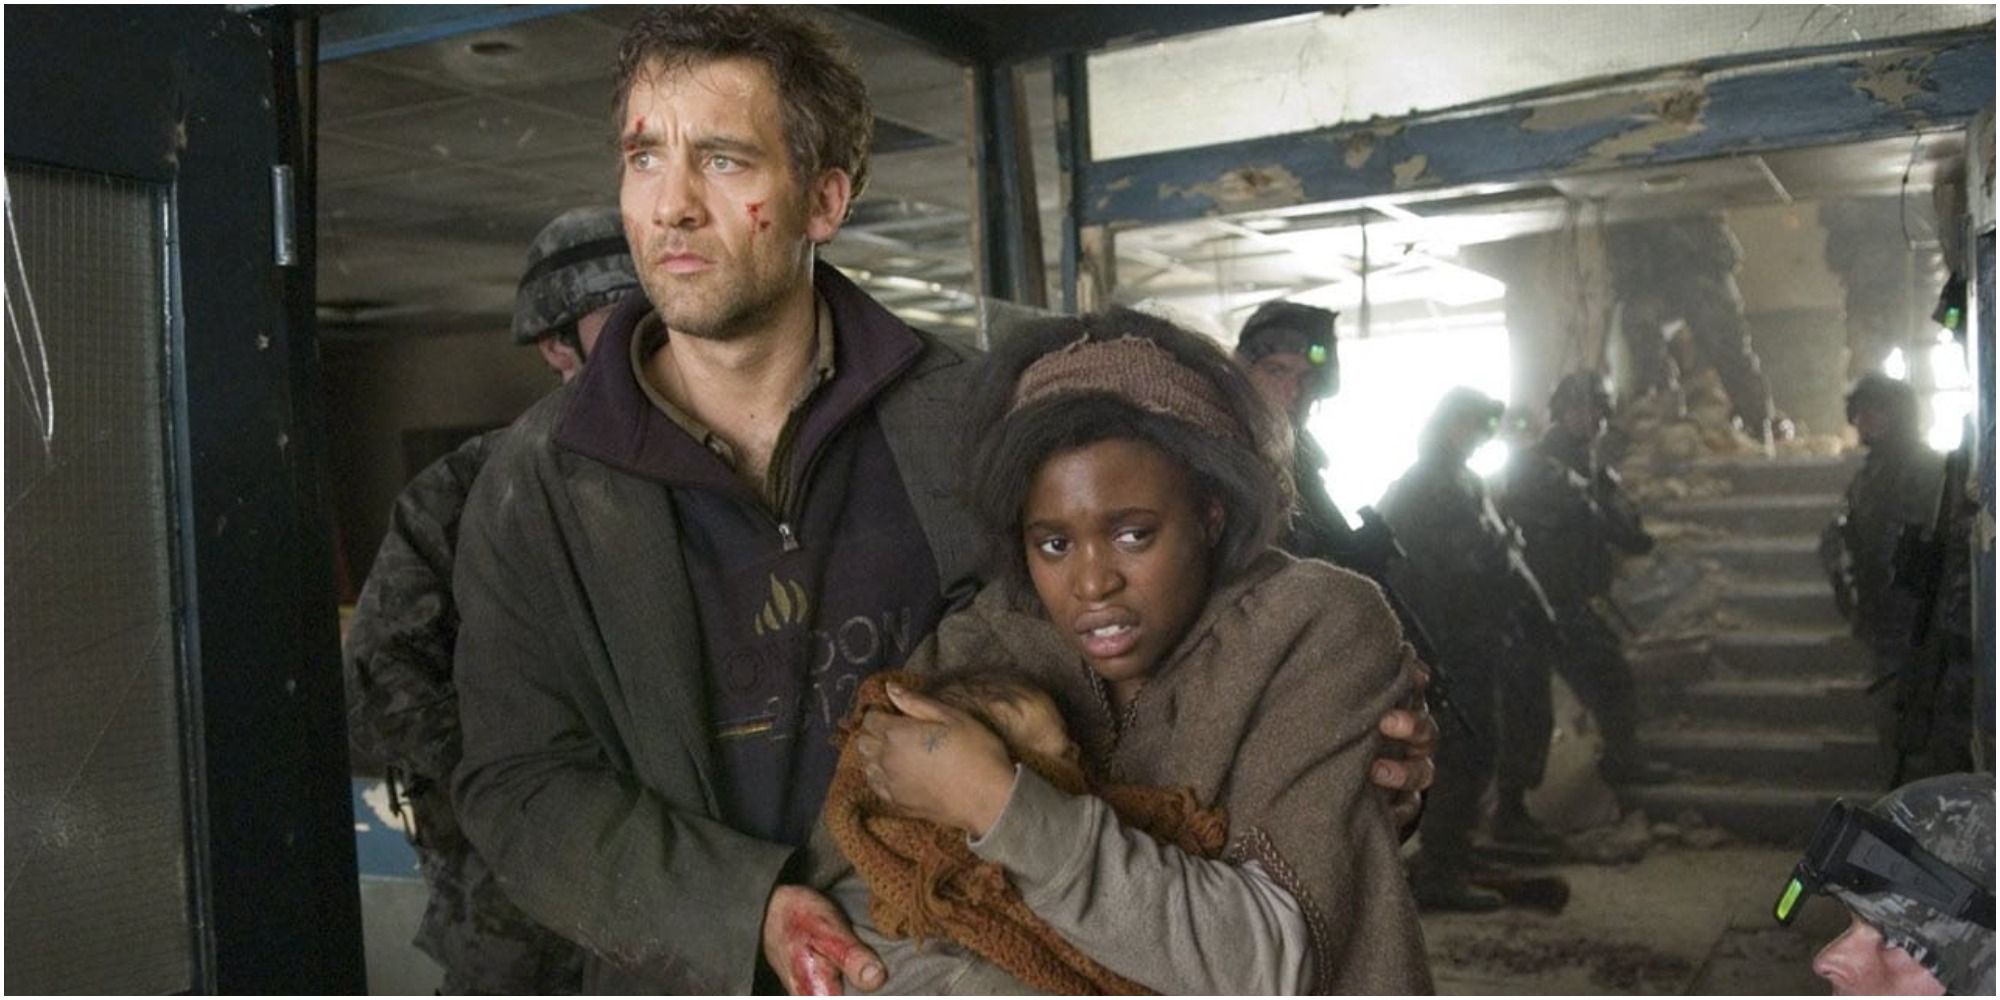 Clare-Hope Ashitey and Clive Owen in Children of Men looking looking miserable surrounded military 